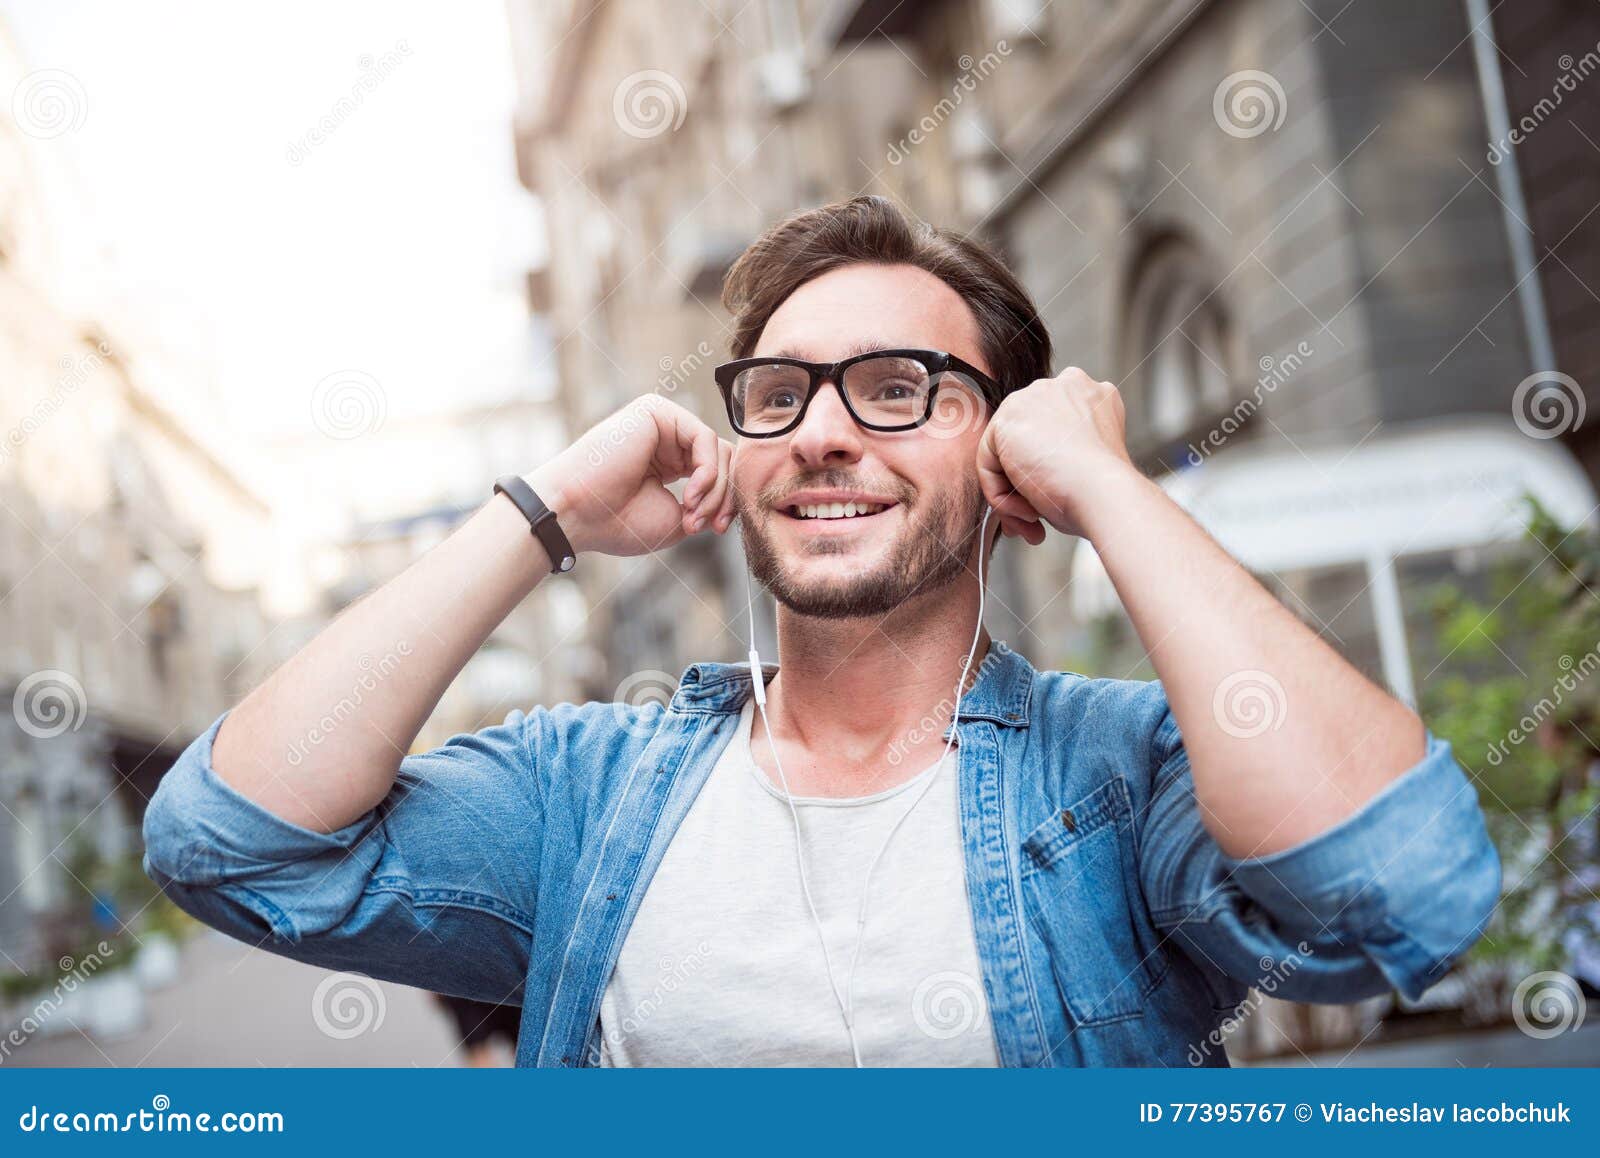 Handsome Young Man Having a Walk Stock Image - Image of hear, building ...